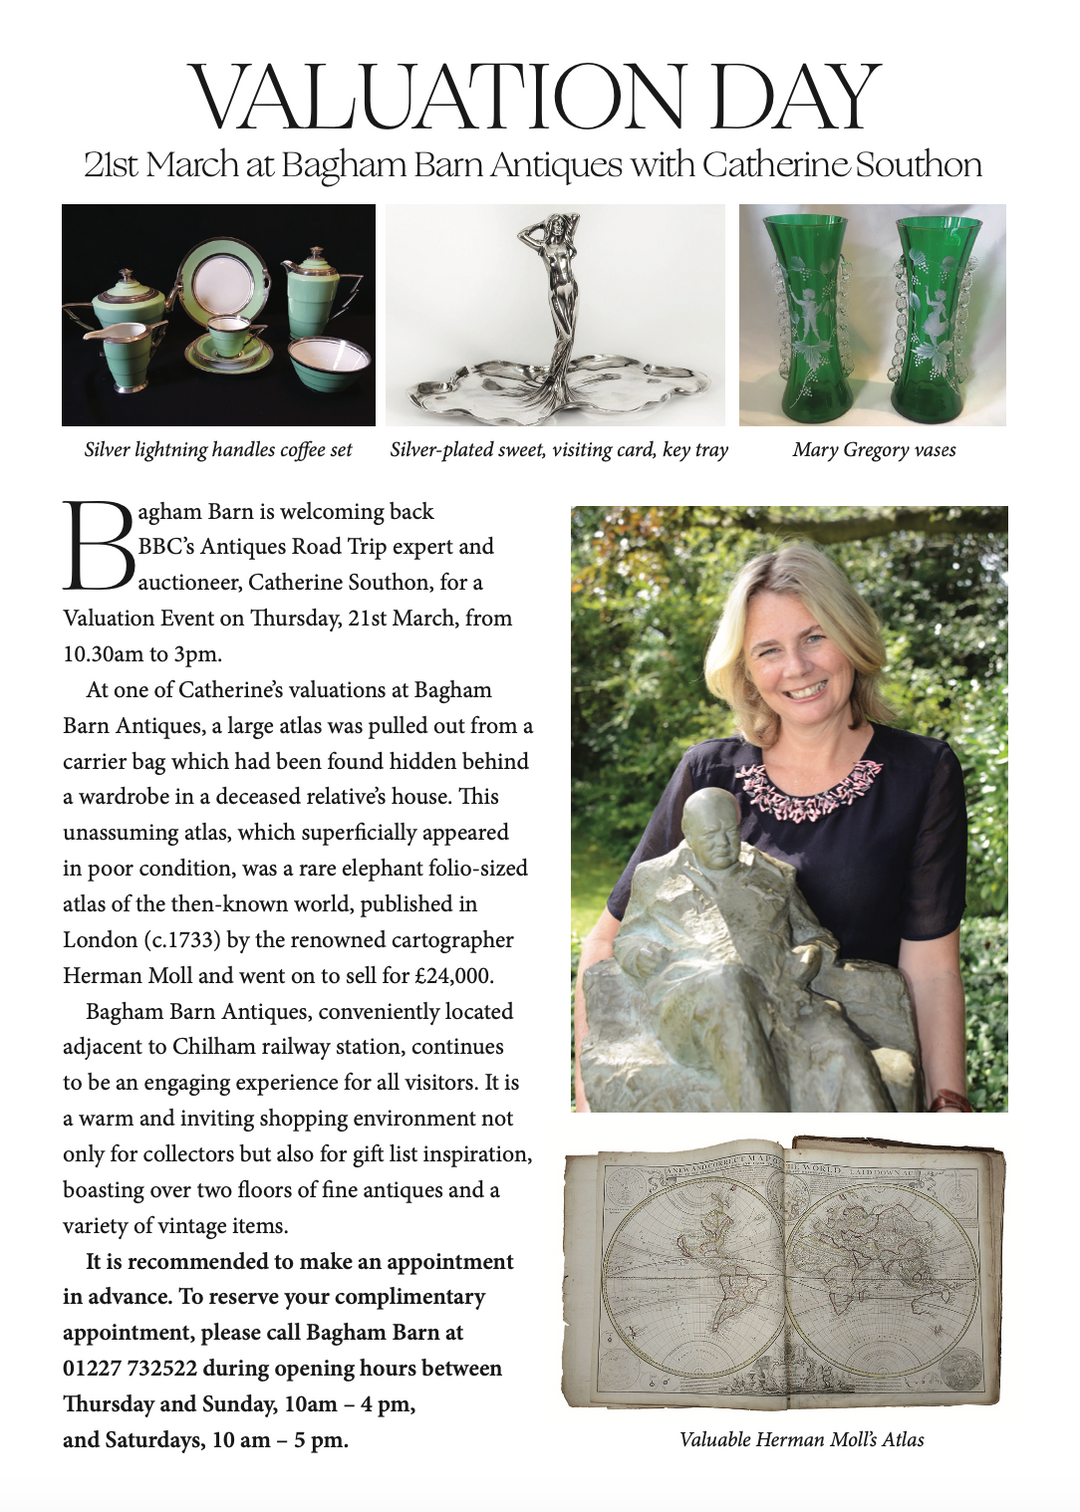 A Valuation Day with Catherine Southon